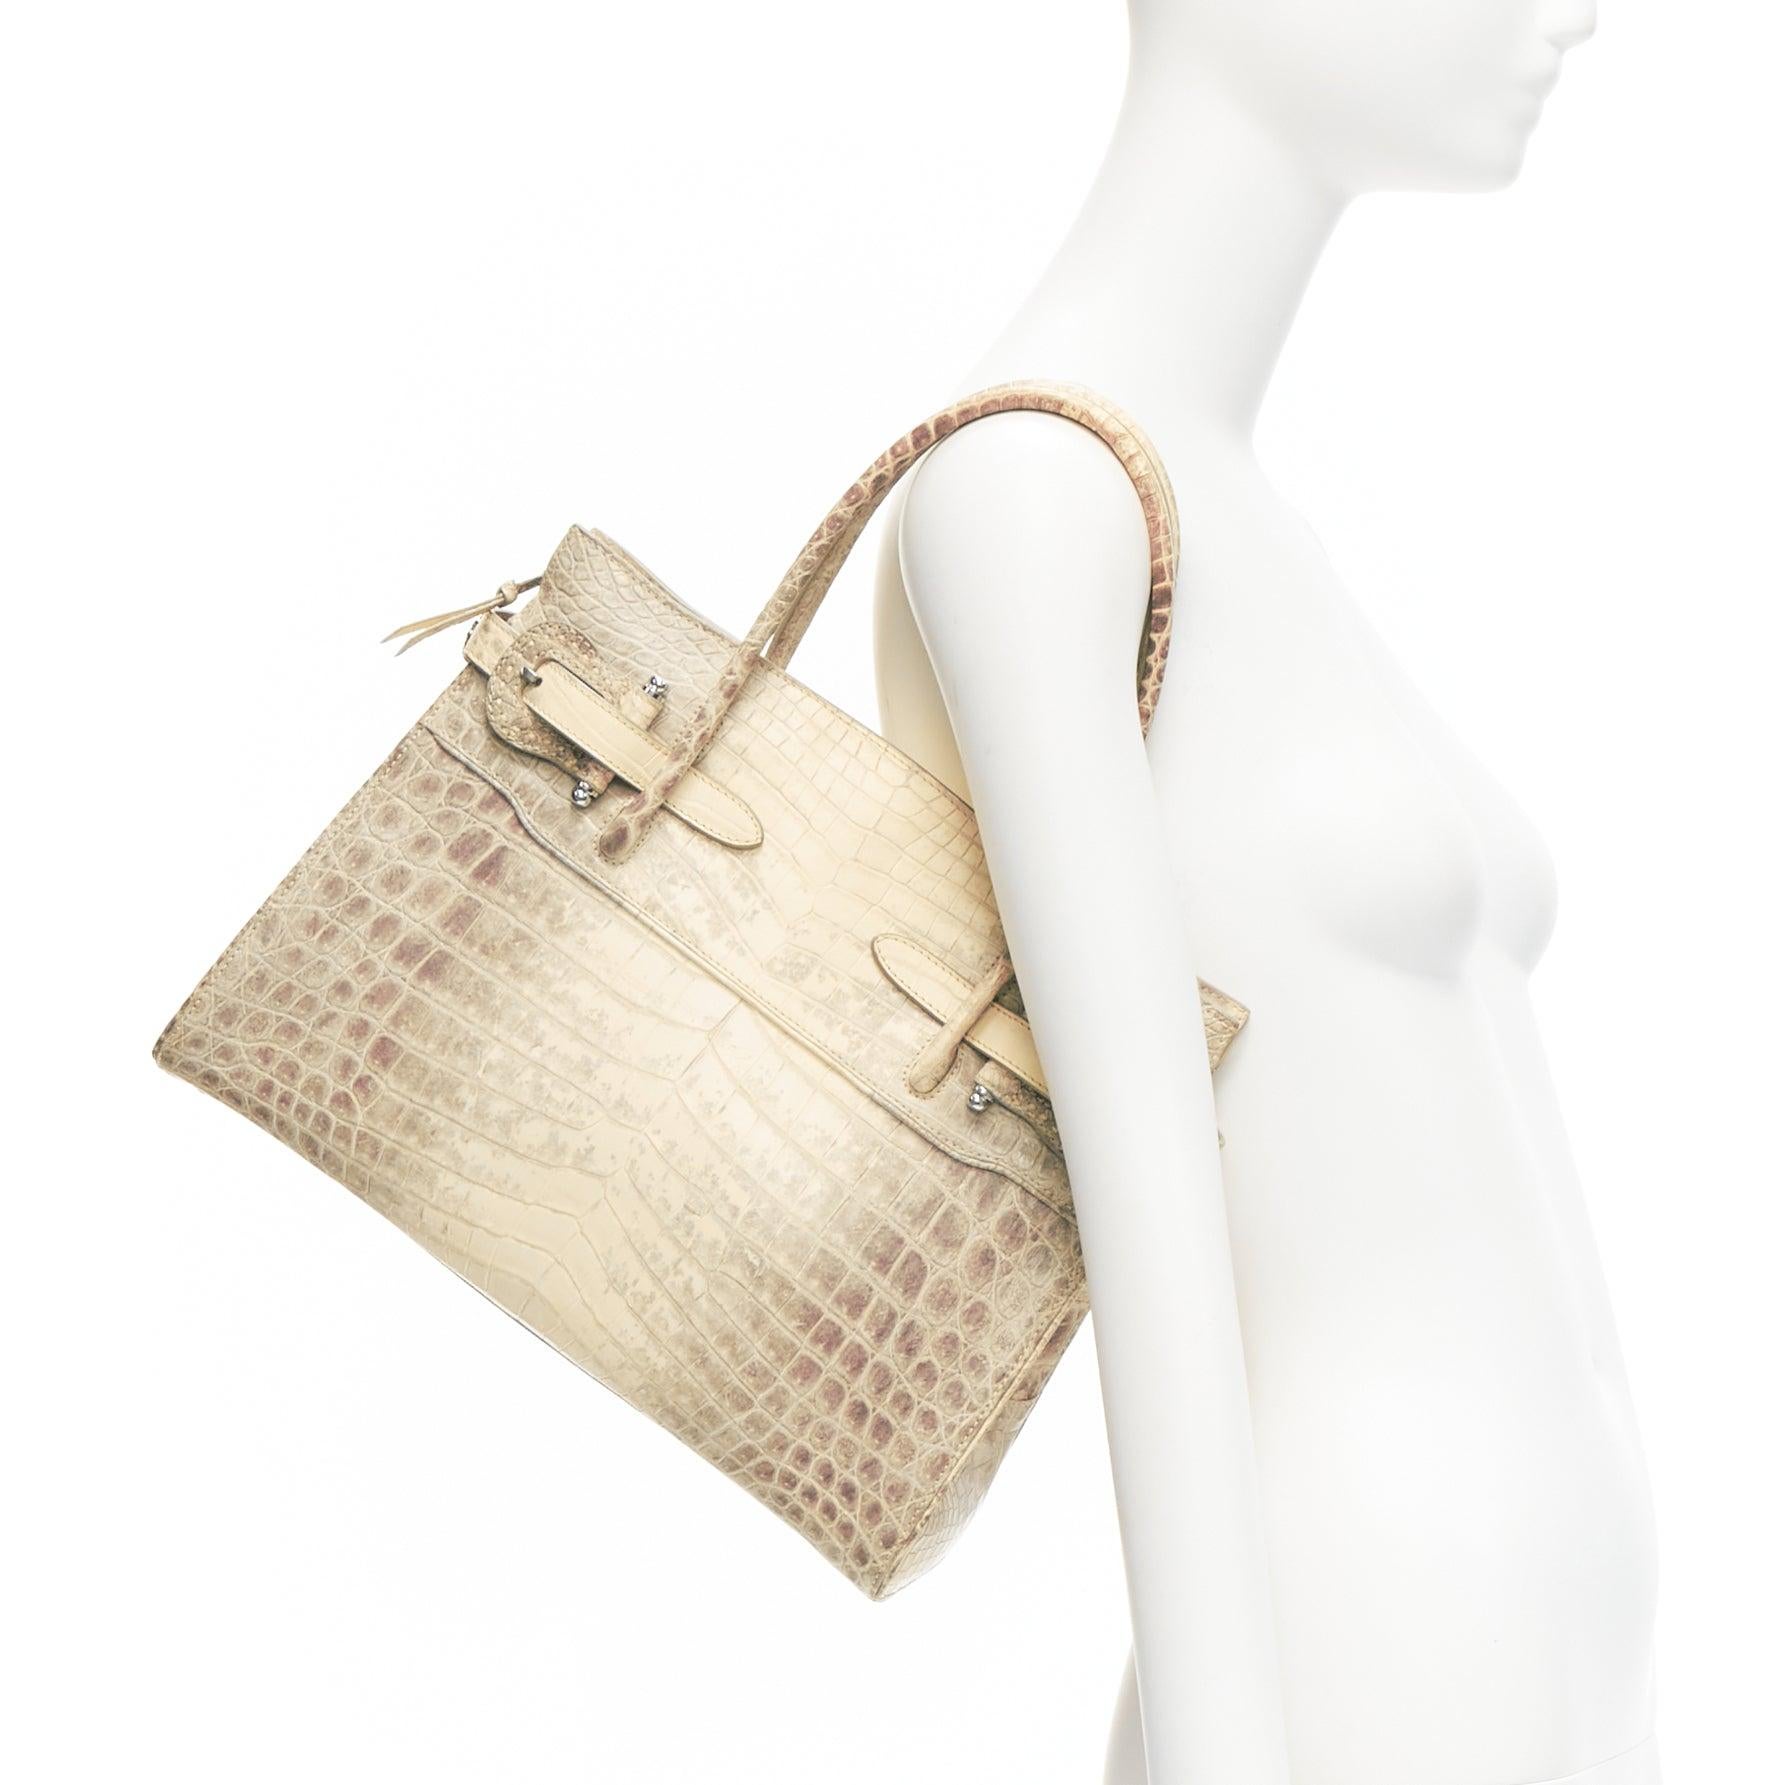 KWANPEN Himalayan gradient scaled leather silver D buckles tote bag
Reference: CELE/A00021
Brand: Kwanpen
Material: Leather
Color: Beige
Pattern: Animal Print
Closure: Zip
Lining: Nude Leather
Extra Details: Gradient scaled leather